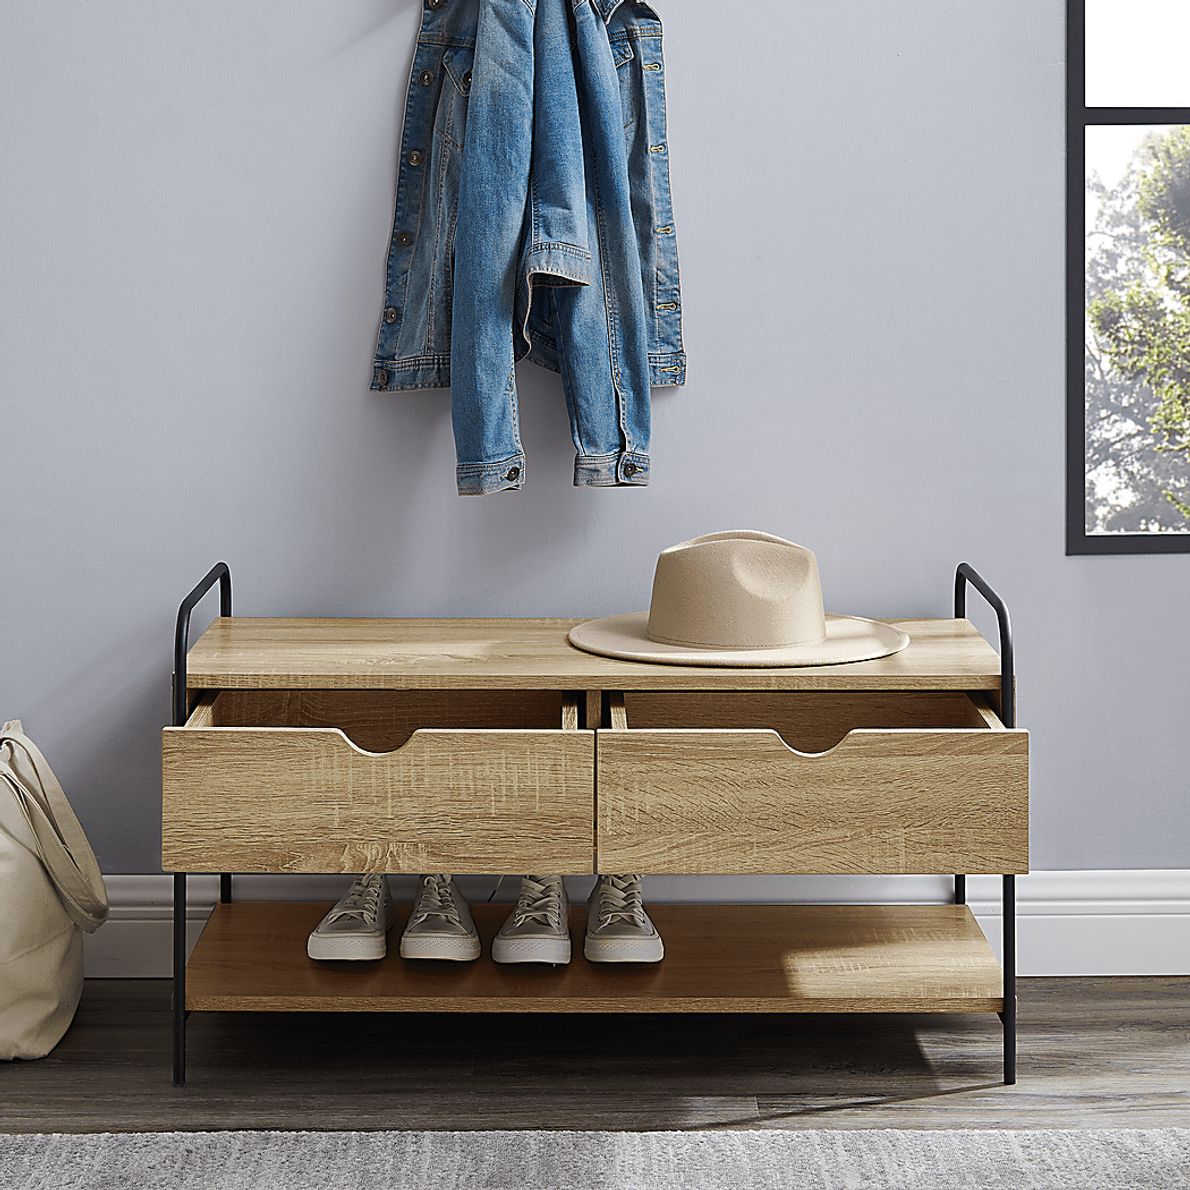 Withlow Brown Accent Bench